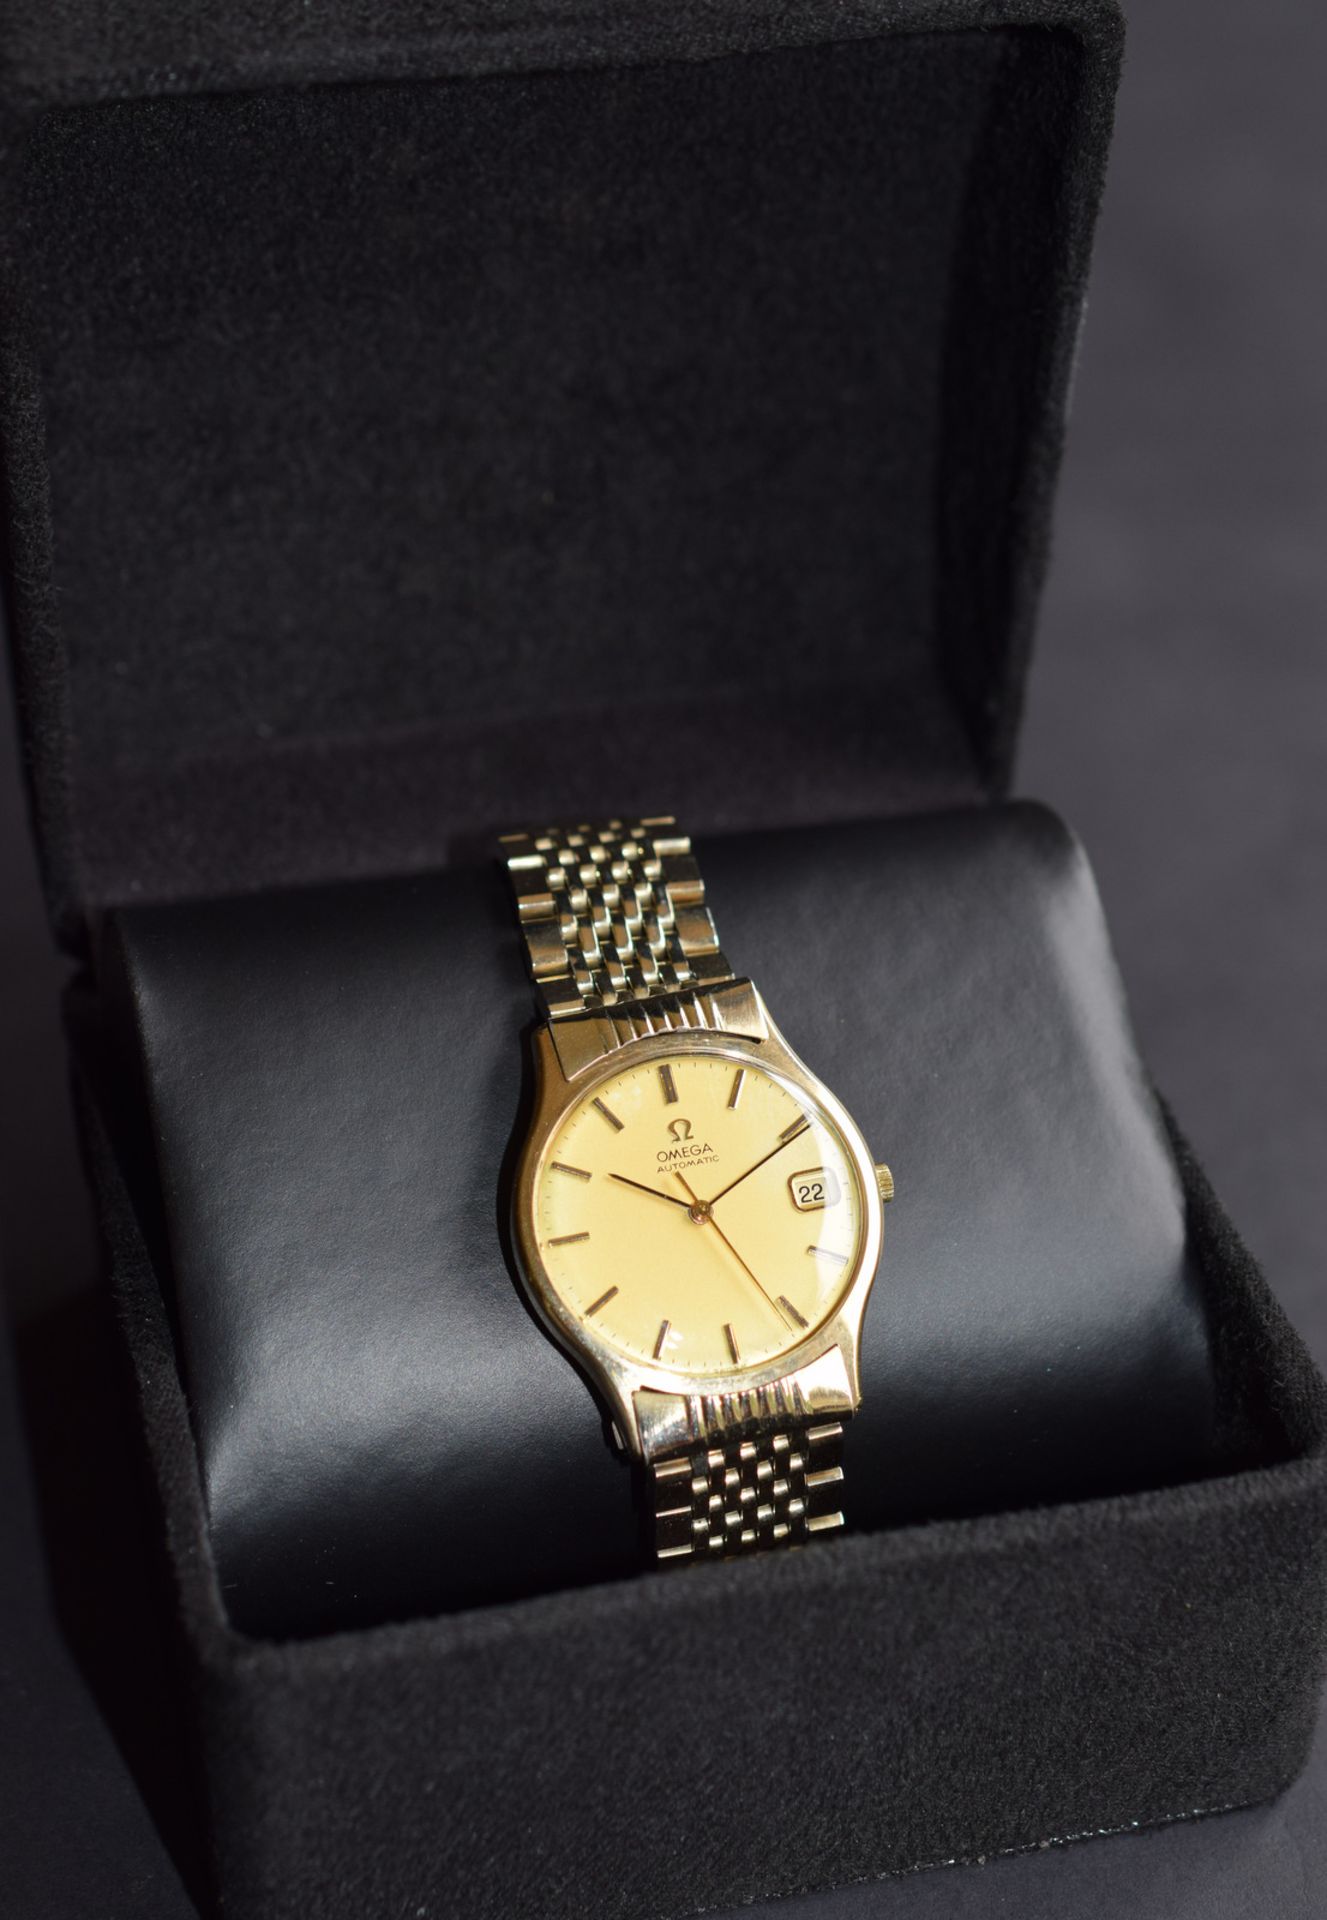 9ct Gold Omega Automatic - Image 3 of 11